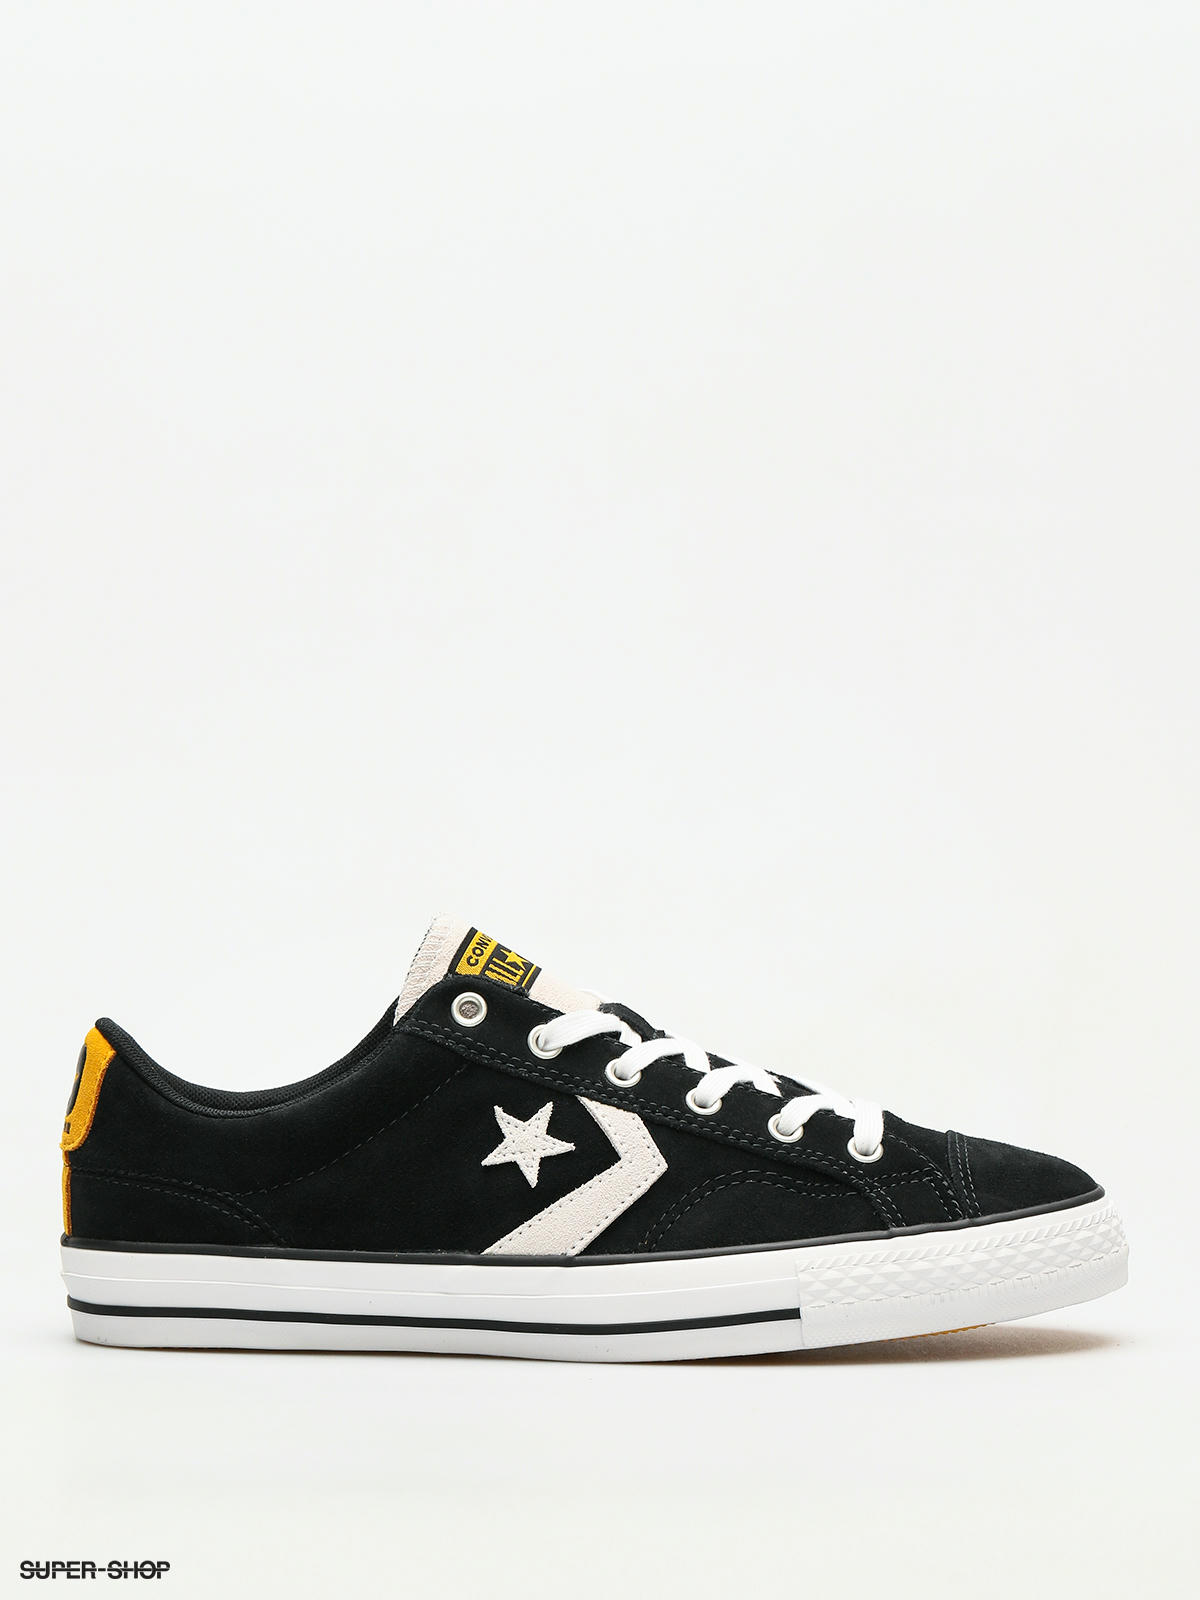 converse star player ox suede